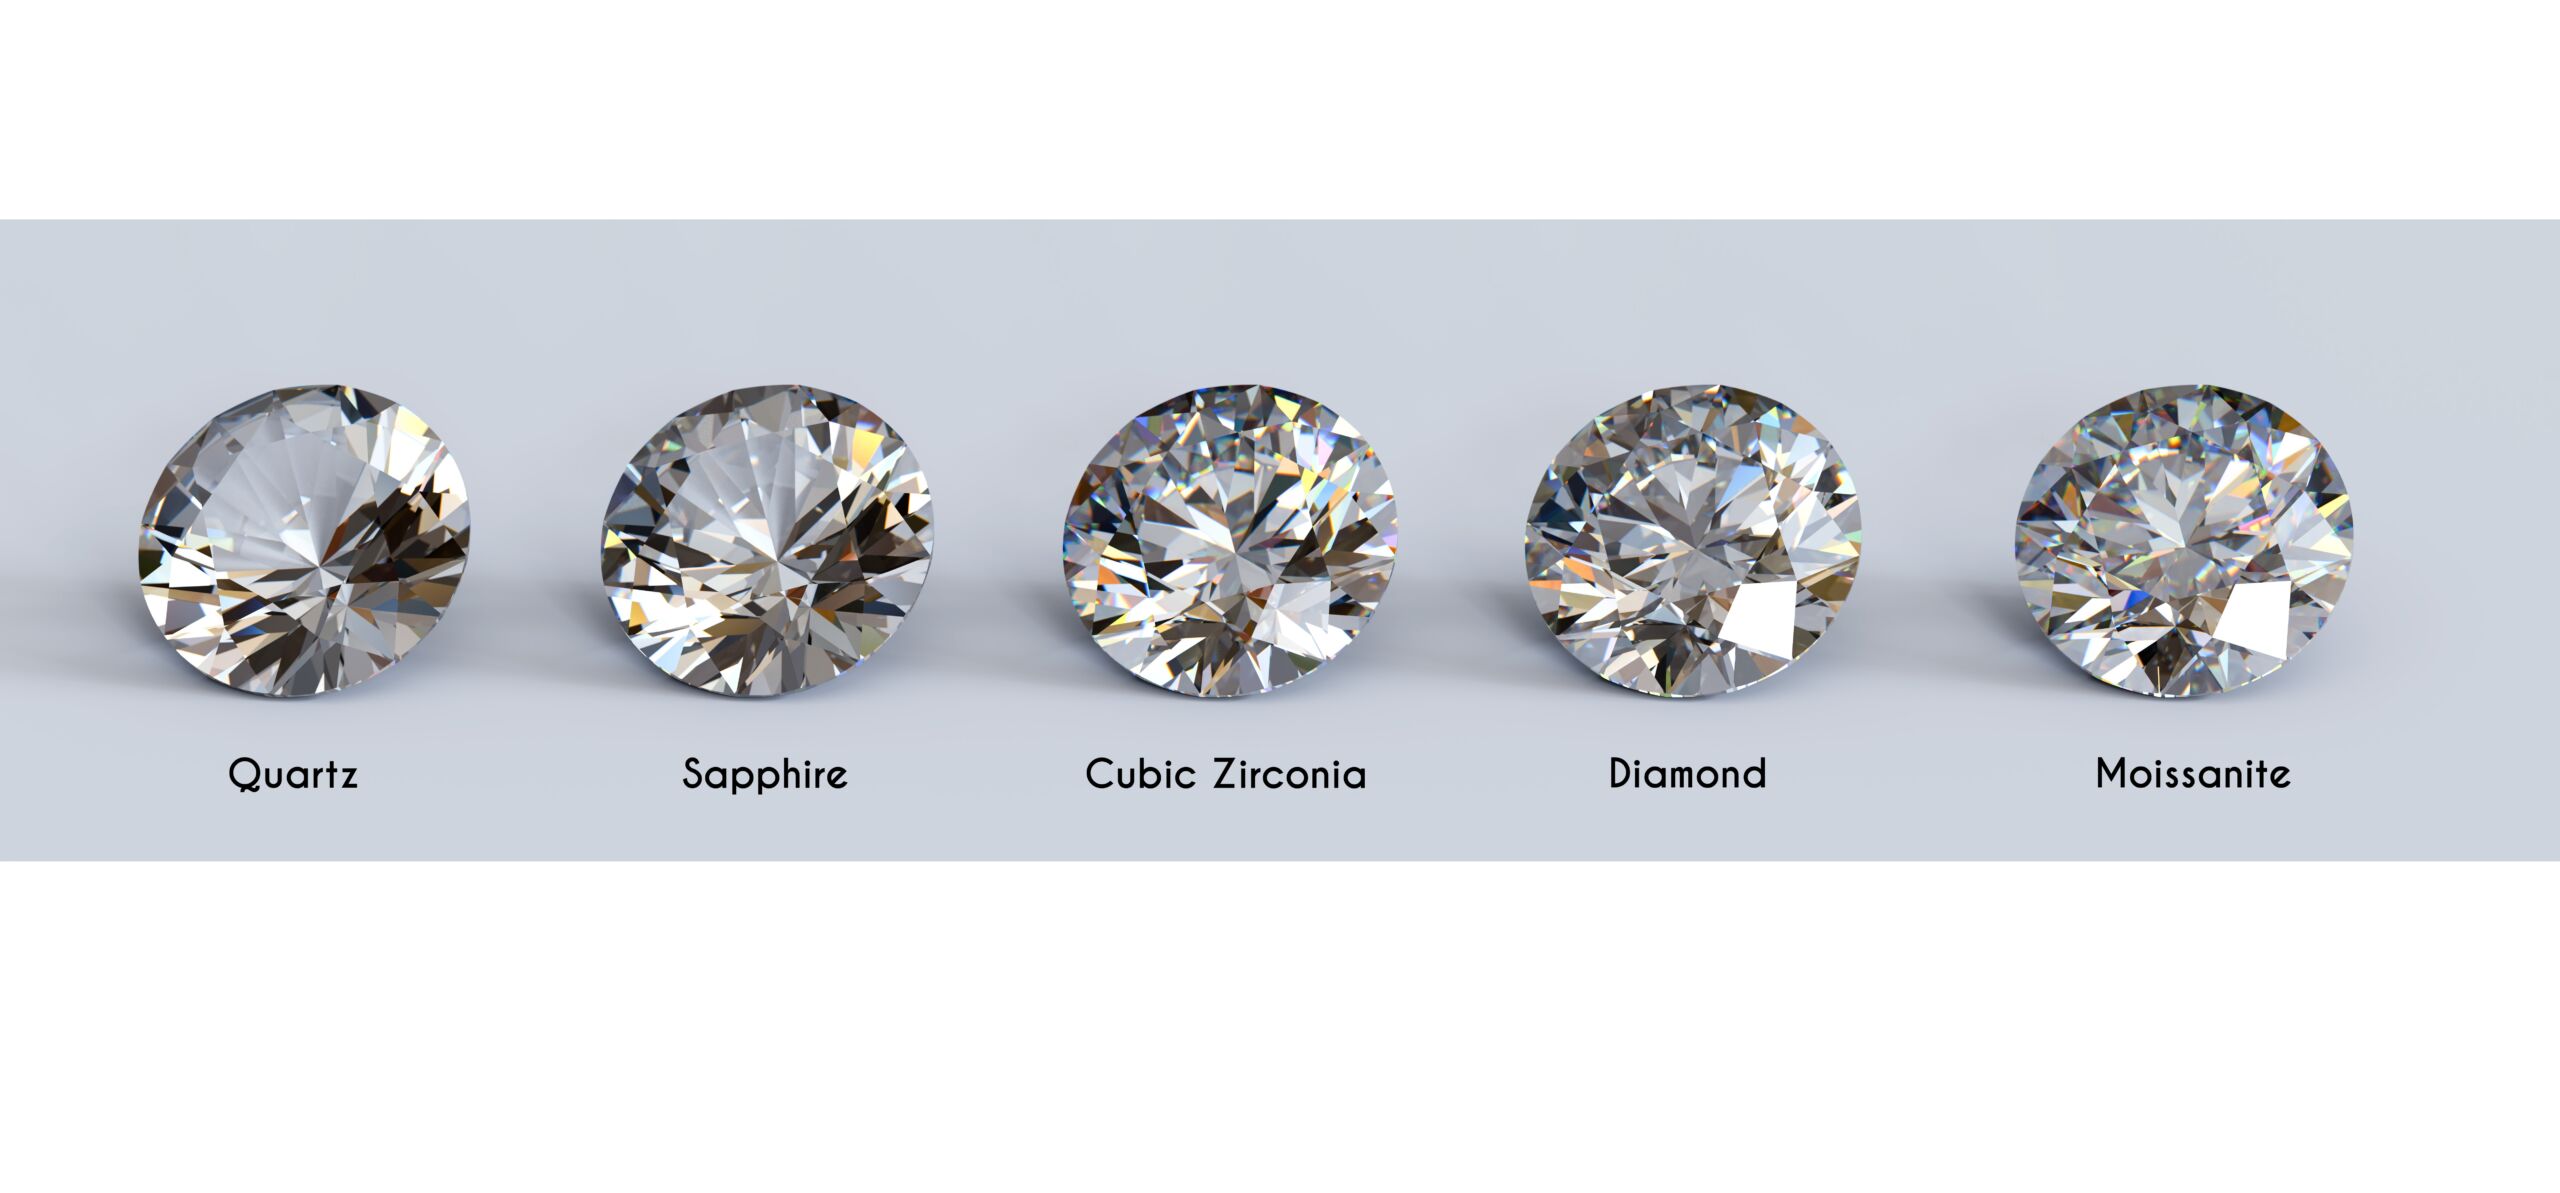 Image of Diamonds and White Sapphires Compared